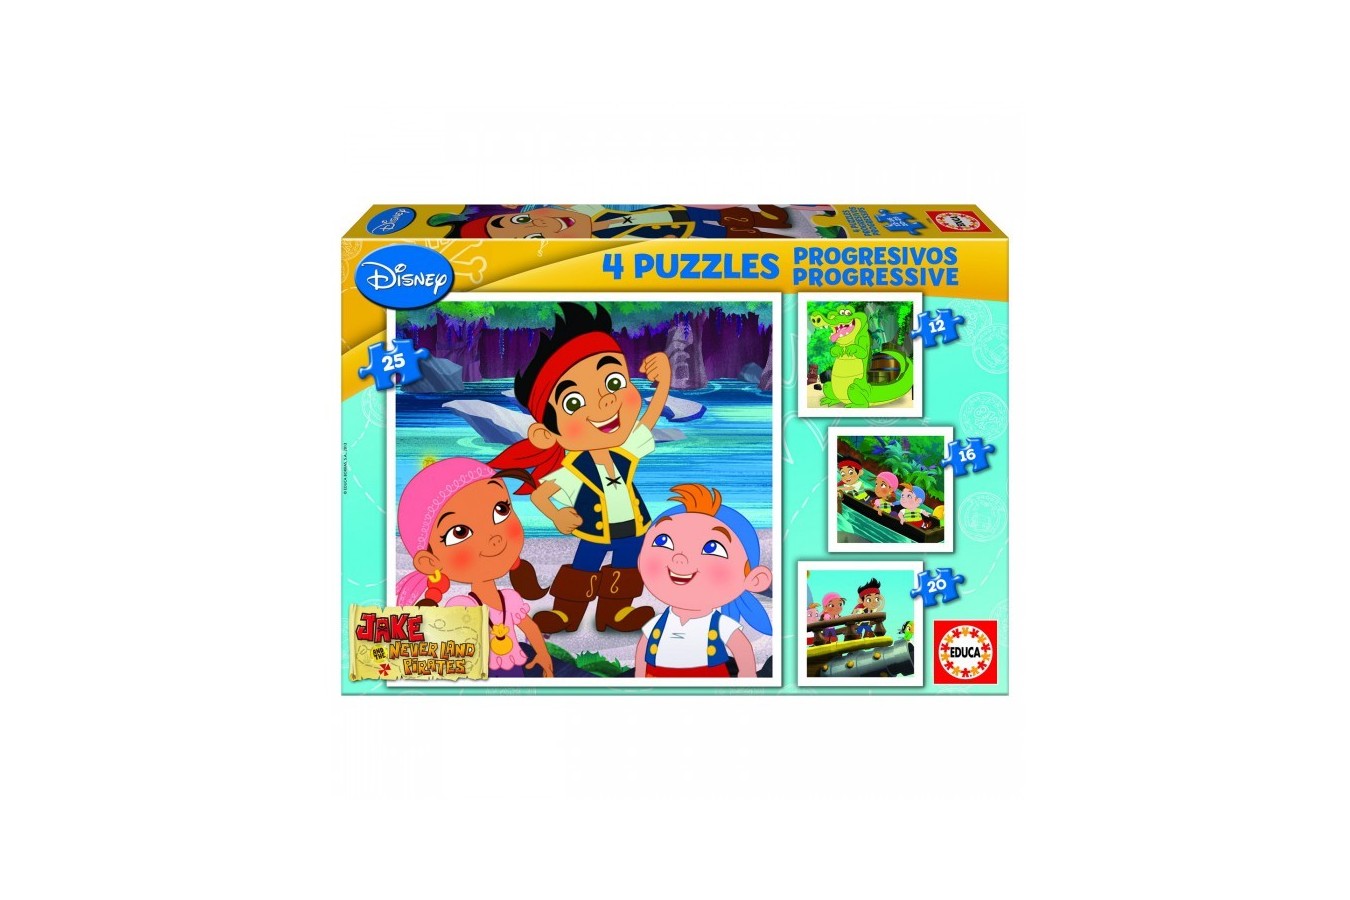 Puzzle Educa - Jake and the Neverland Pirates, 12/16/20/25 piese (15598)